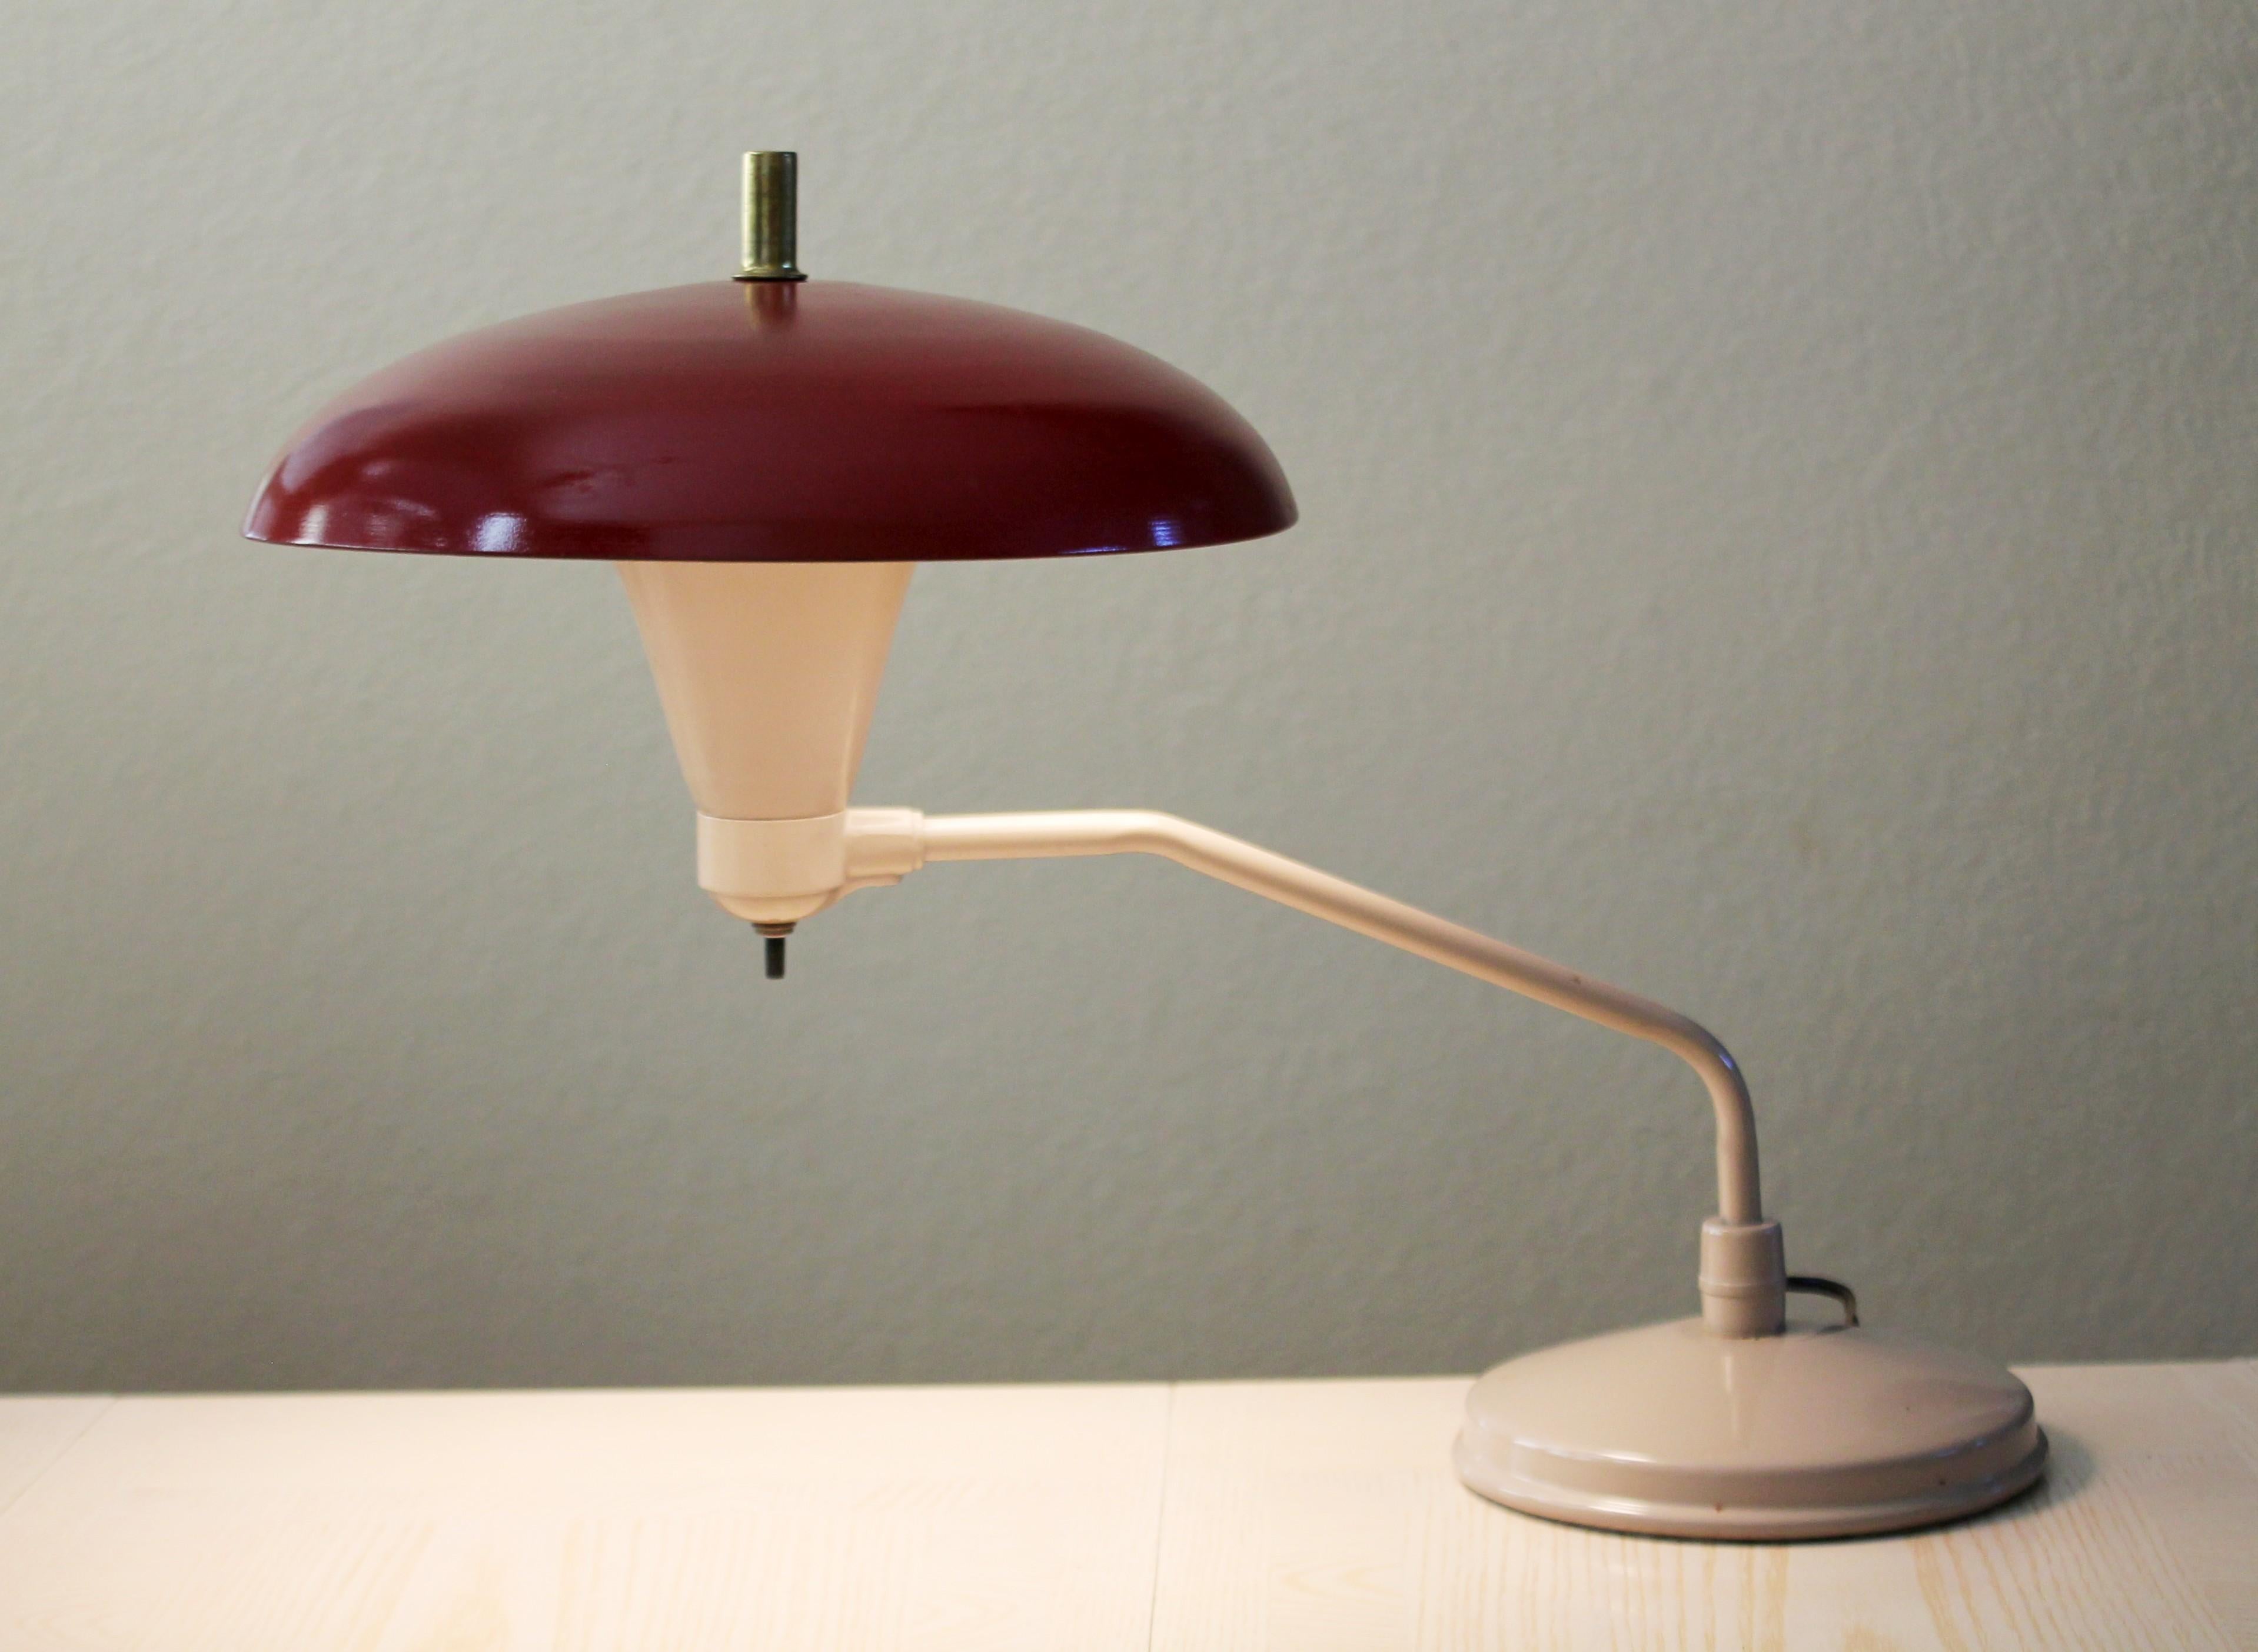 Absolutely Gorgeous!

Mid Century
Articulating Swing Arm 
Reflecting Saucer Desk/Table Lamp

Red & Cream Enamel

Great vintage condition!

16